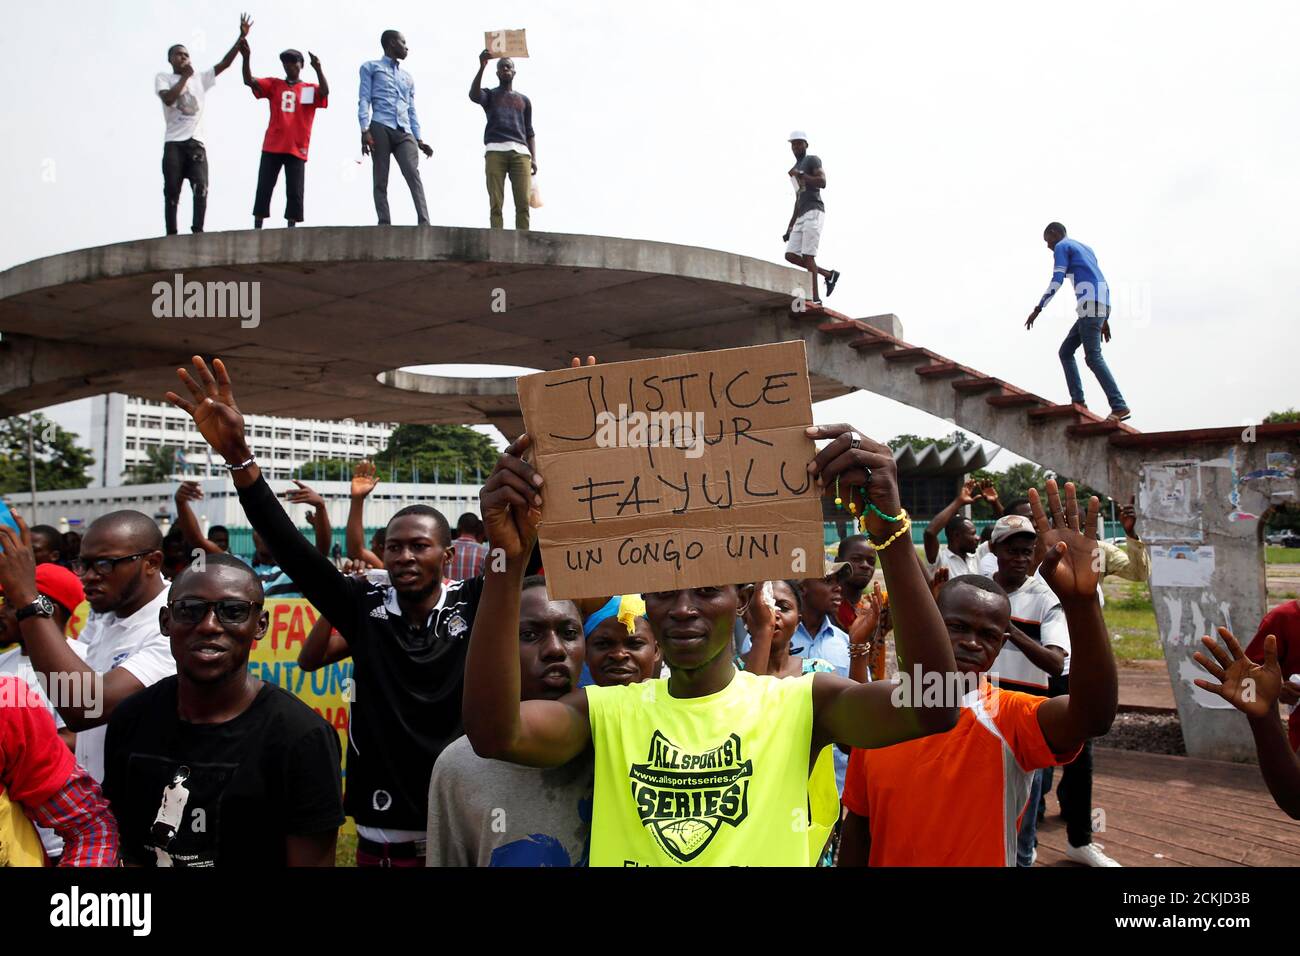 Supporters of Martin Fayulu, runner-up in Democratic Republic of Congo's presidential election, protest in front of the constitutional court as they wait for him to deliver his appeal contesting Congo's National Independent Electoral Commission (CENI) results of the presidential election in Kinshasa, Democratic Republic of Congo, January 12, 2019. REUTERS/Baz Ratner Stock Photo